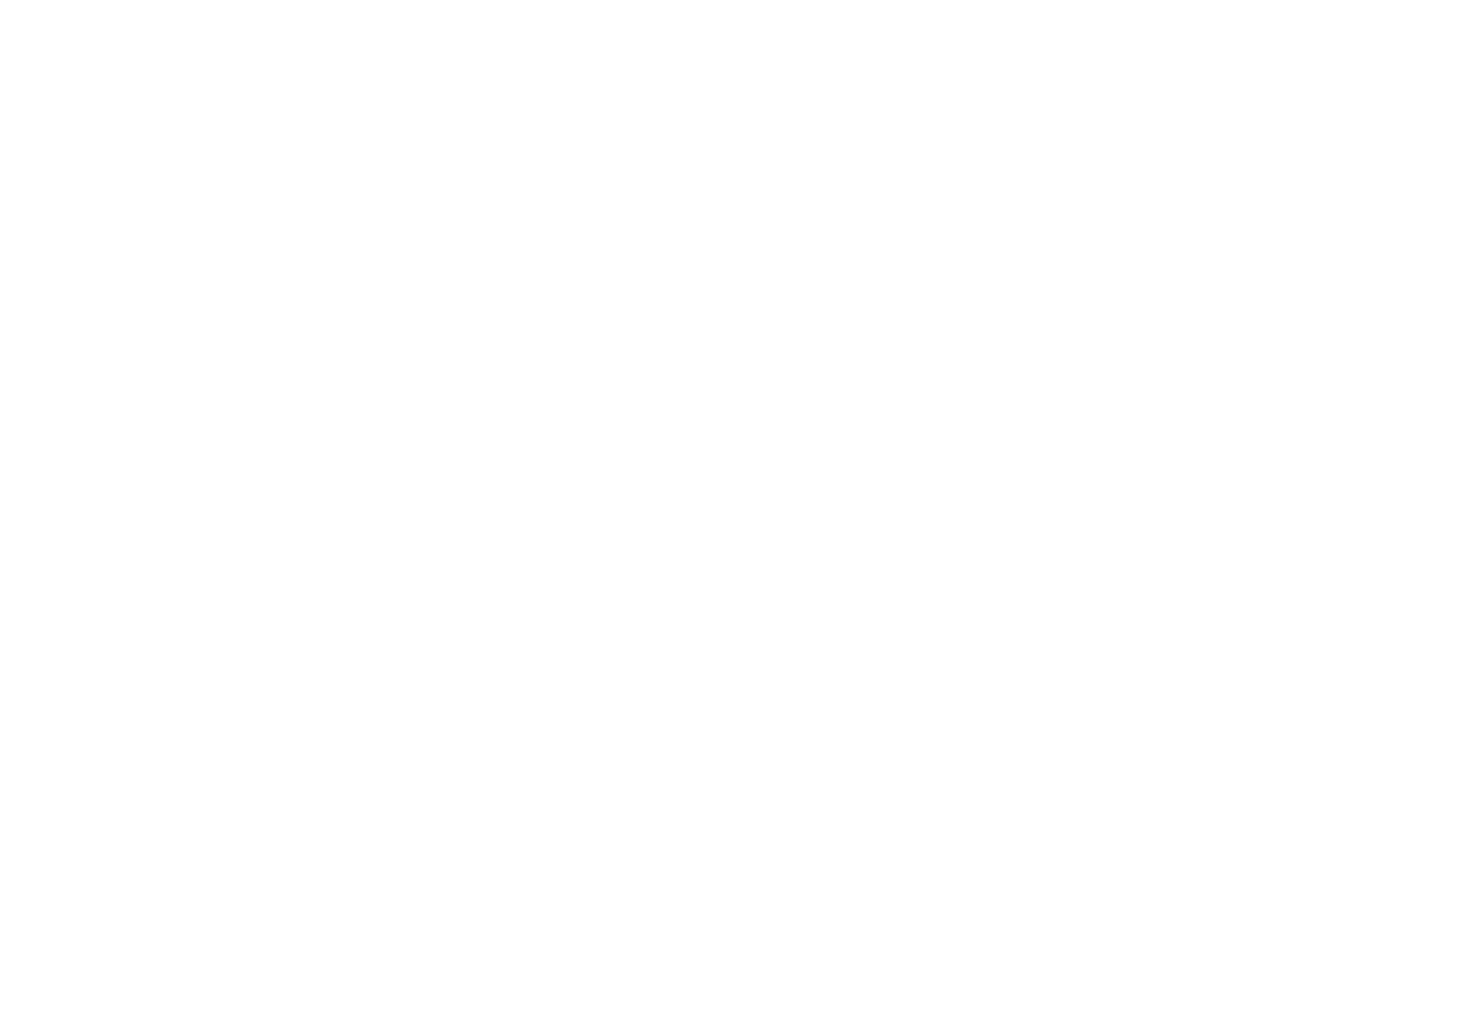 Drive_and_feel_it_LOGO